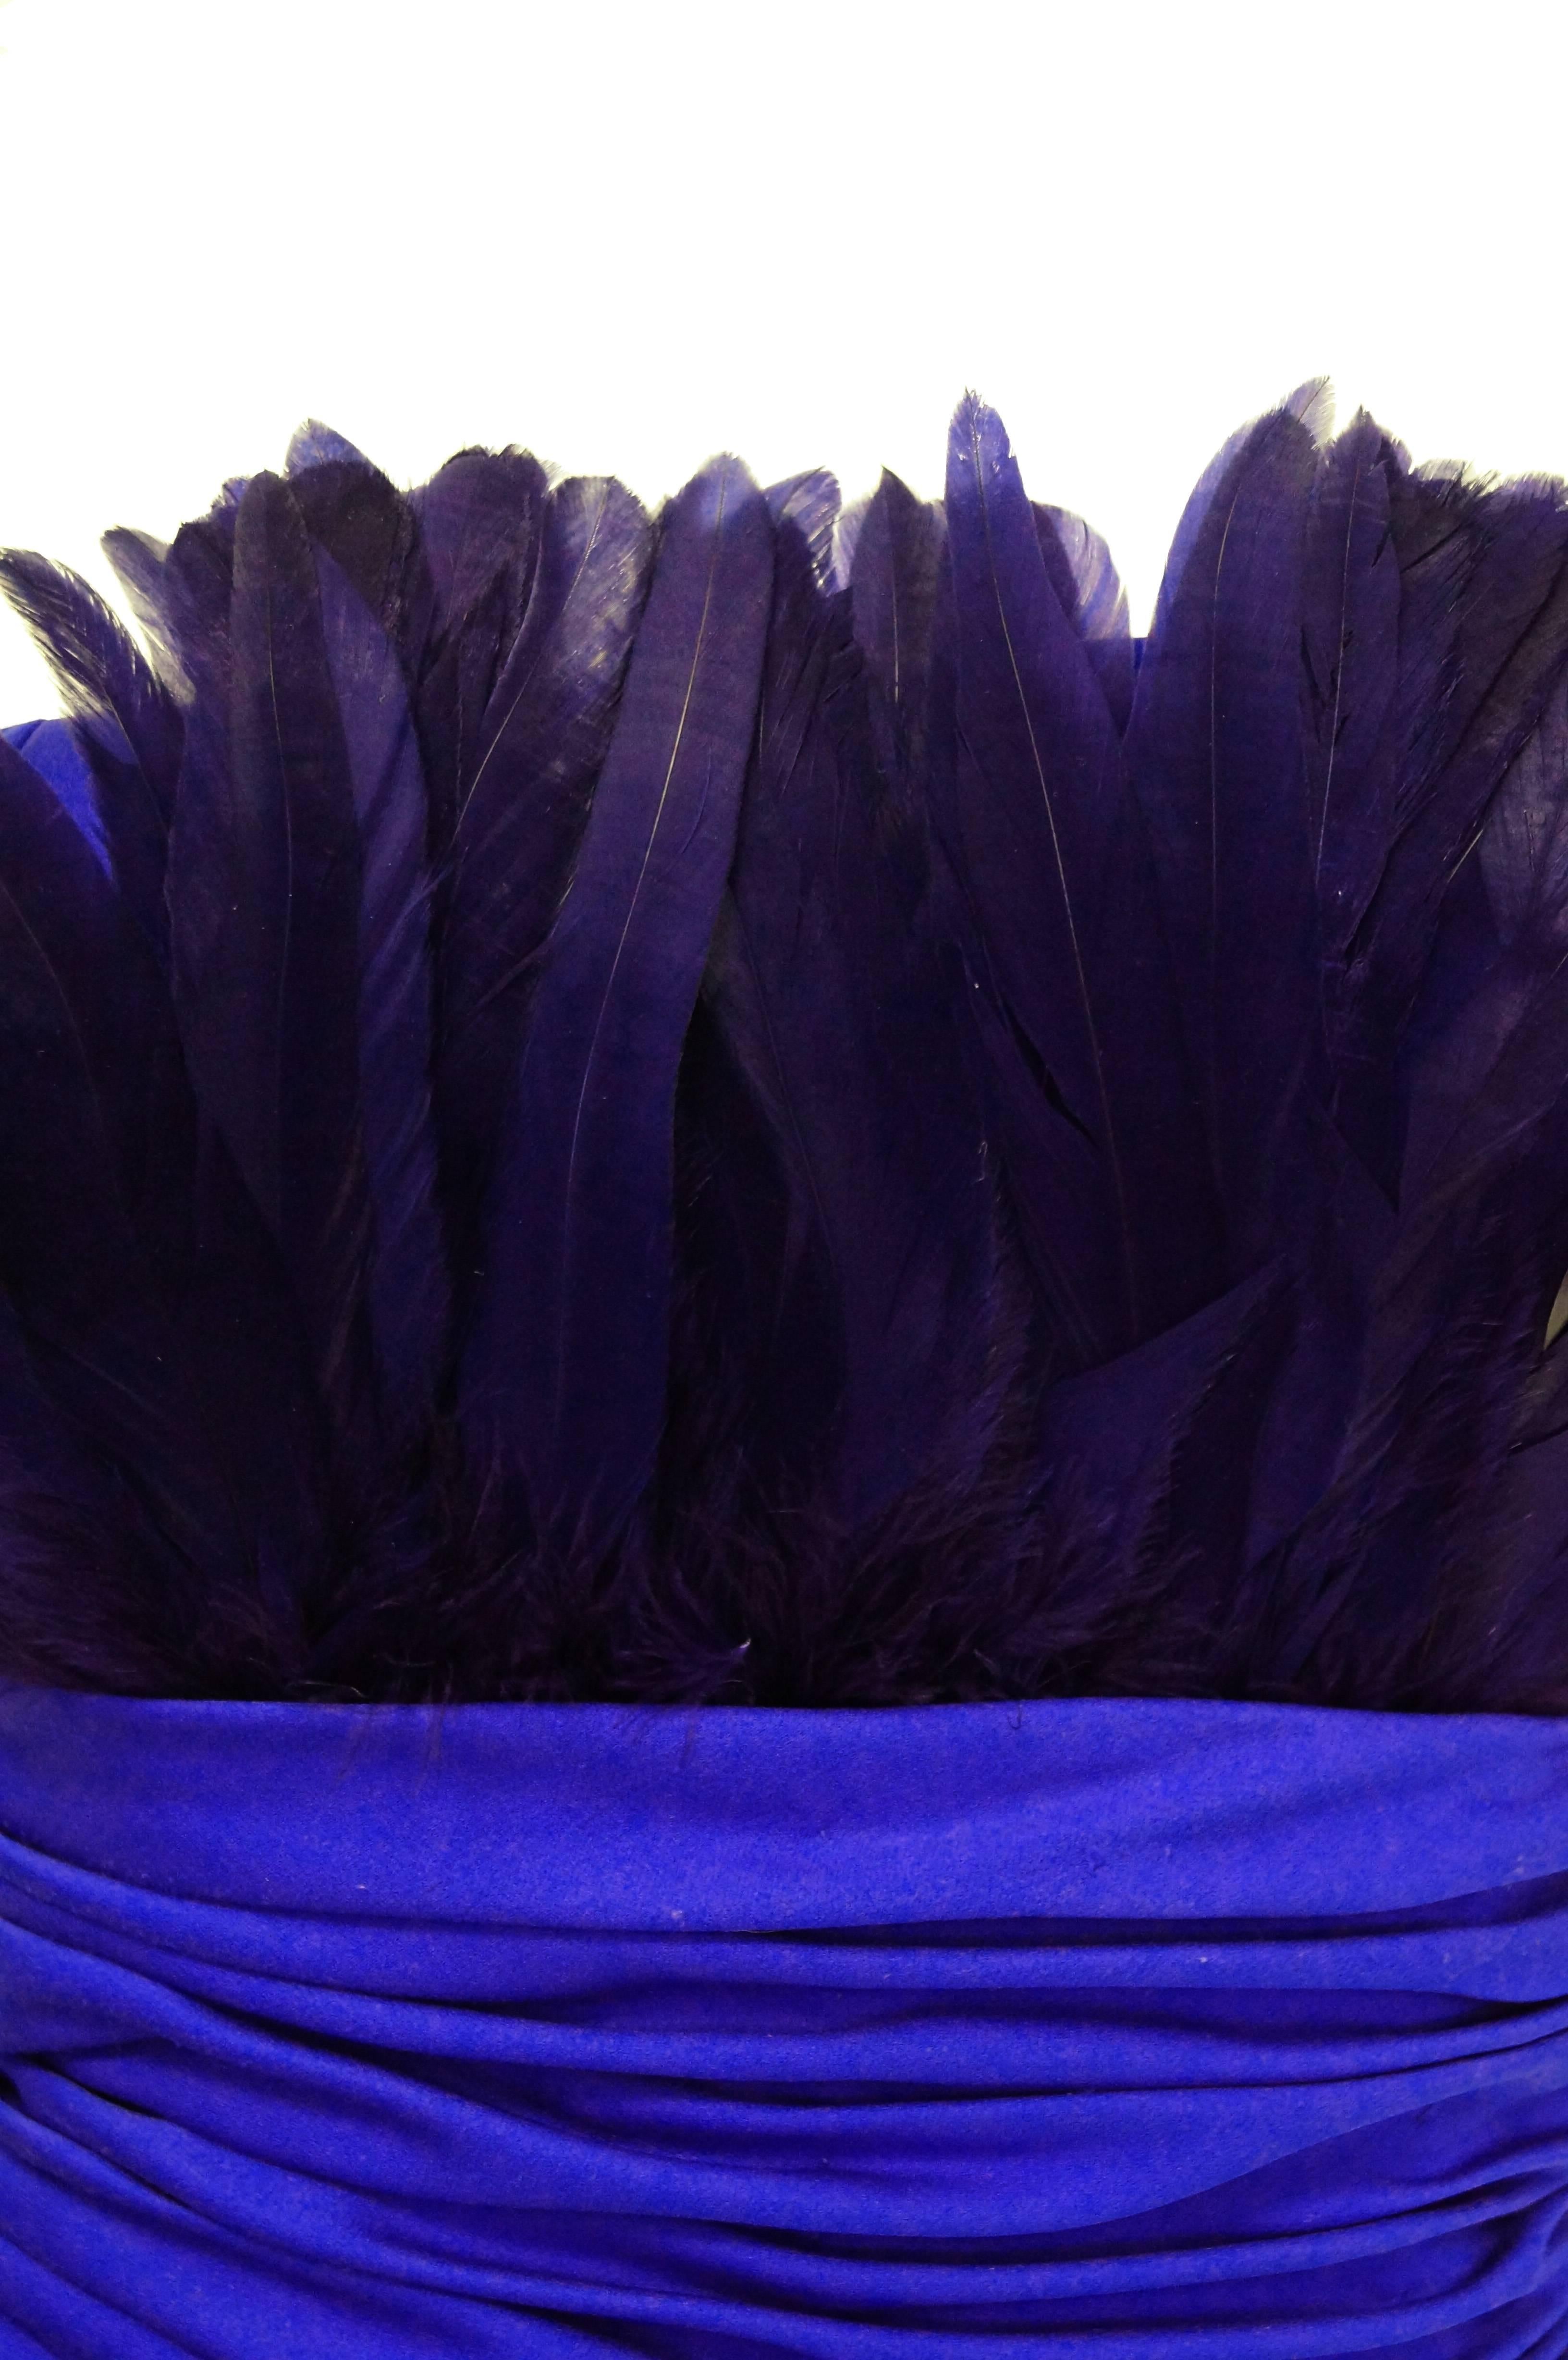 Show stopping elegantly done strapless cocktail dress by Victor Costa. Ultramarine feathers cup the bust of this dress adding drama. The waist is ruched and the skirt is like an upside down tulip with an opening on the left side. Dress zips up the